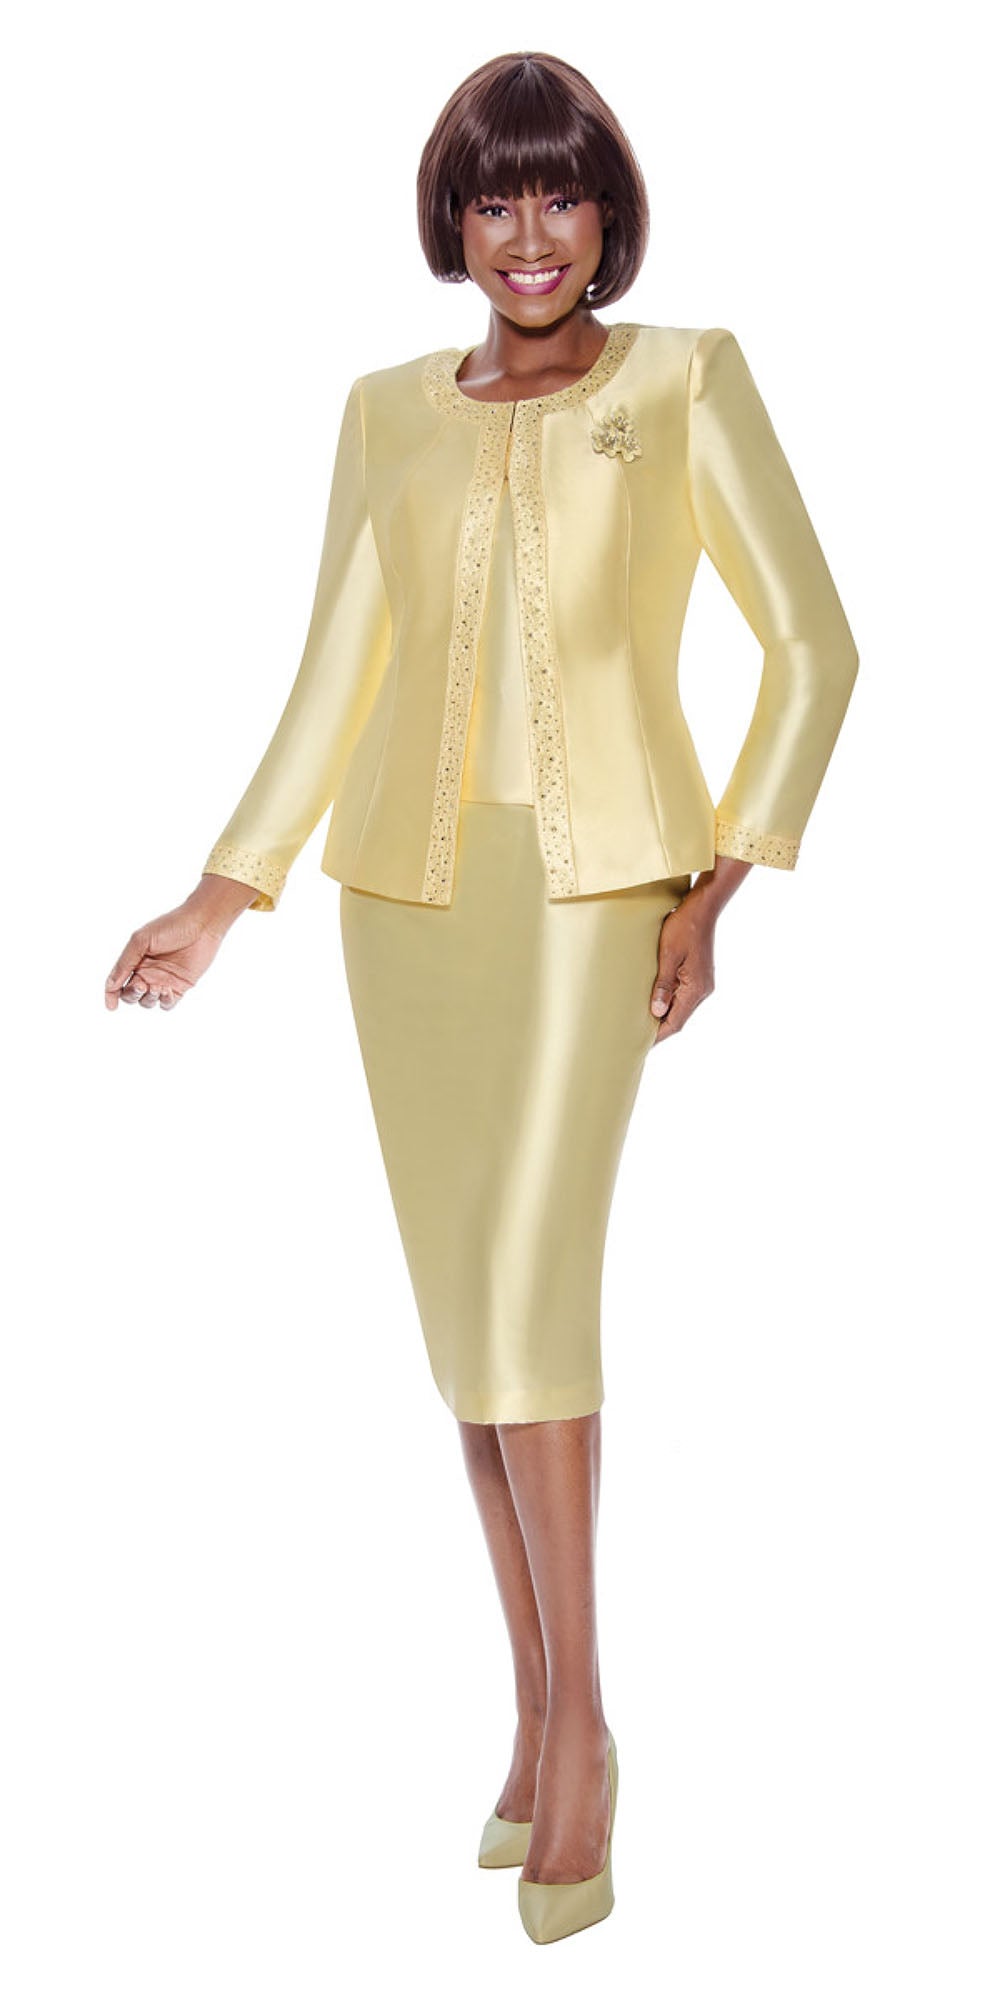 Terramina 7637 - Yellow - Church Suit With Embellished Trim On Jacket